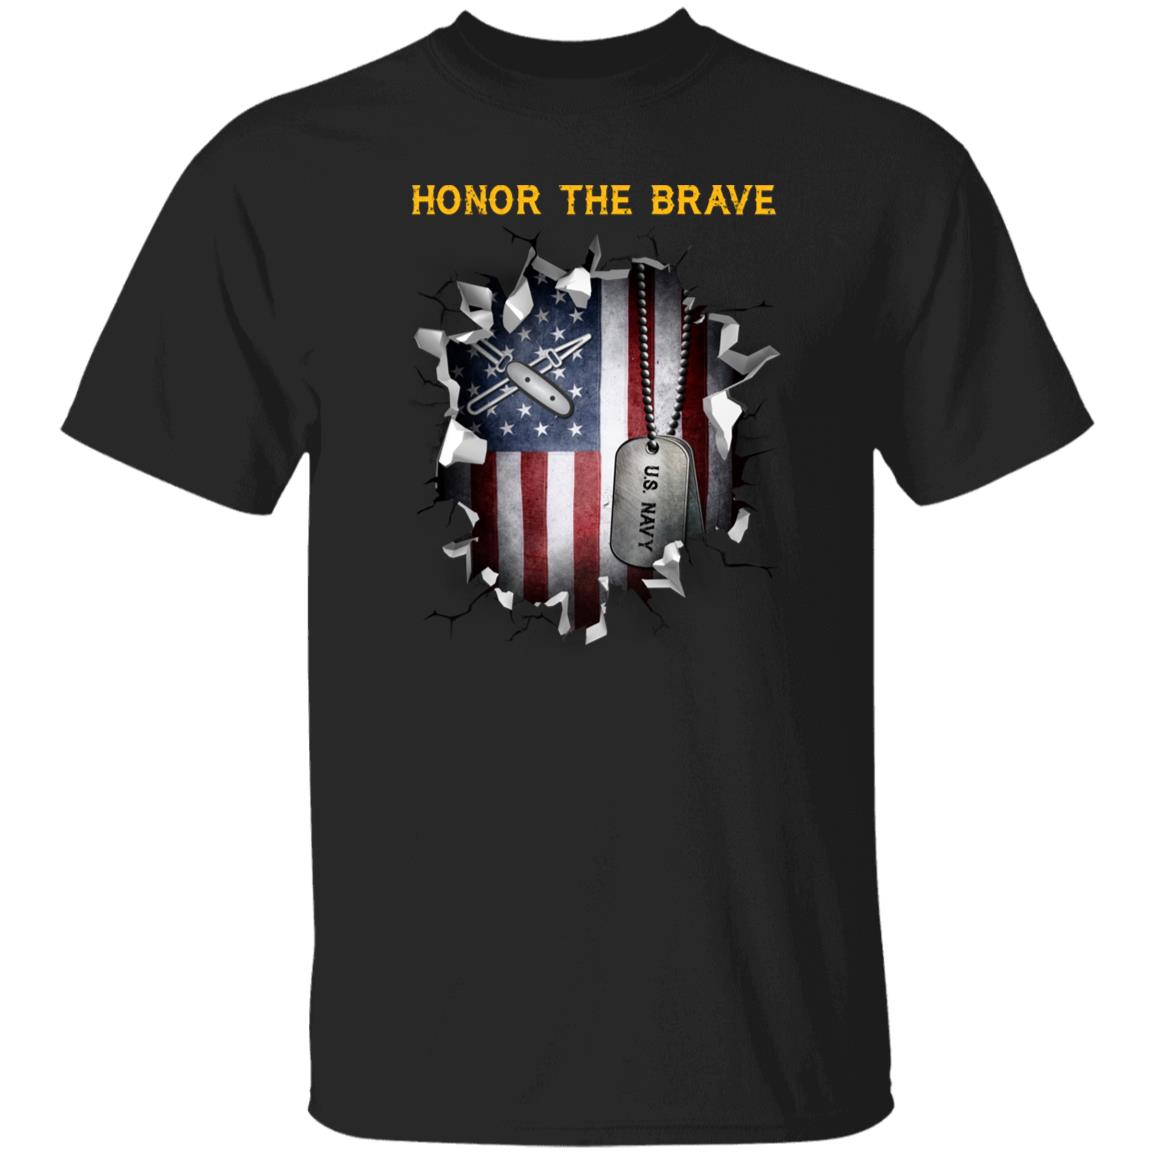 Navy Lithographer Navy LI - Honor The Brave Front Shirt